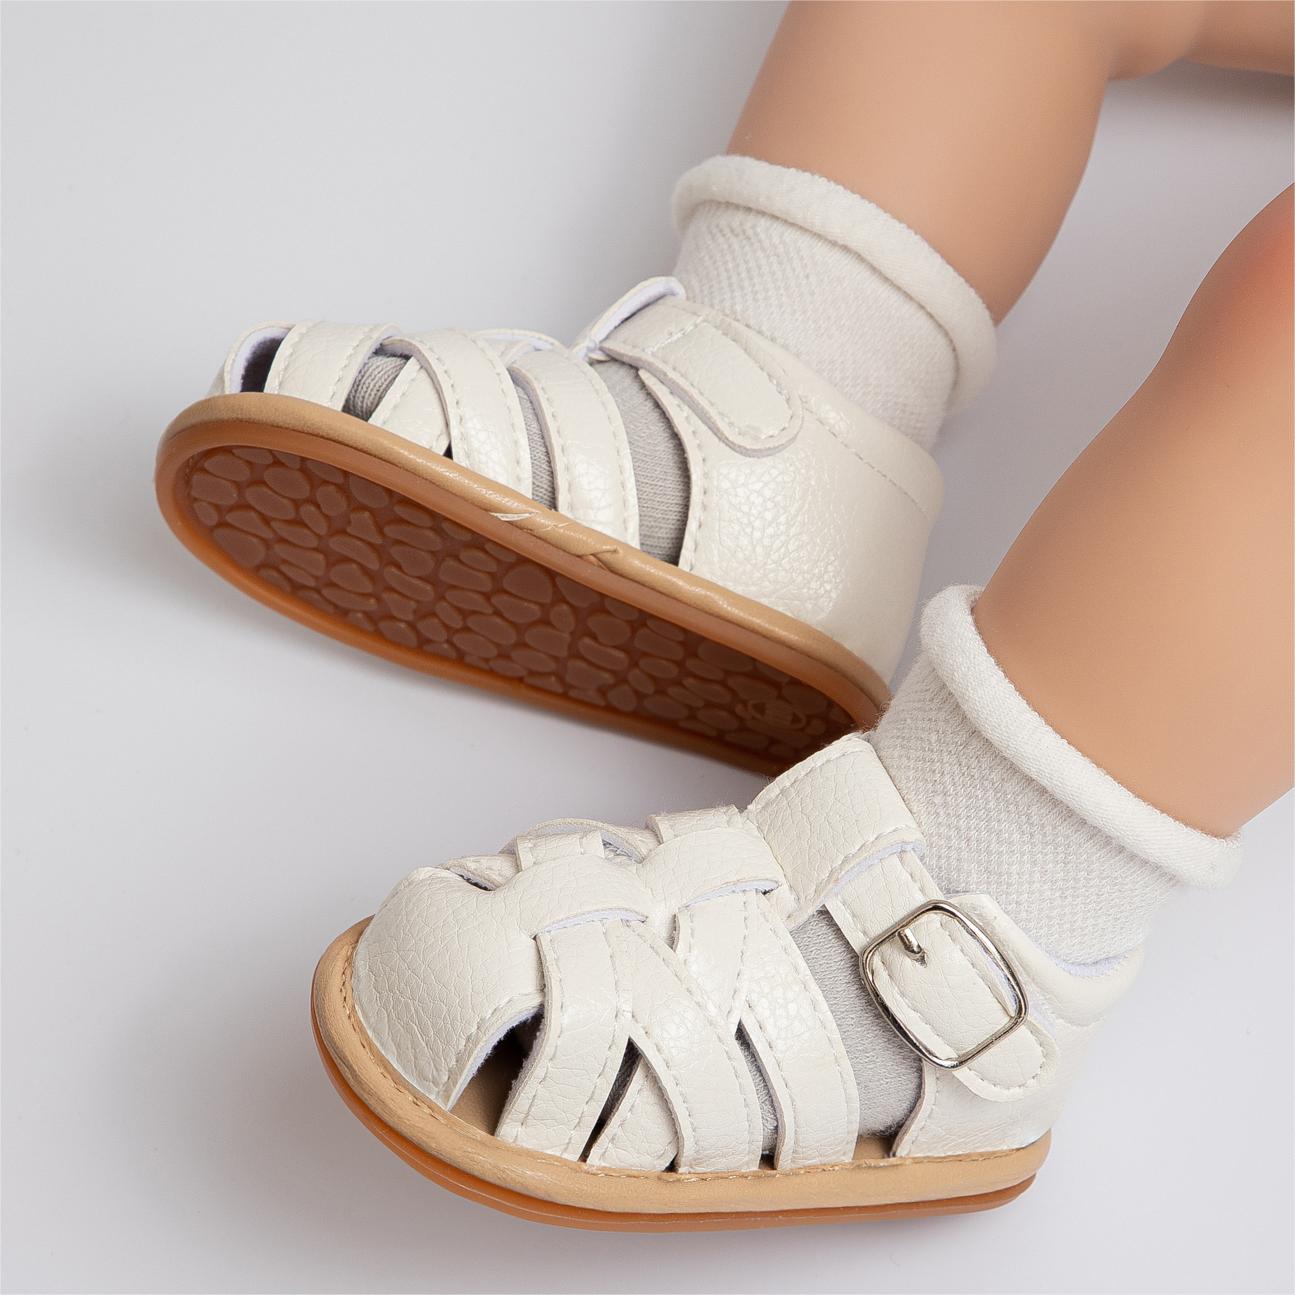 *Baby Sandals/Slippers